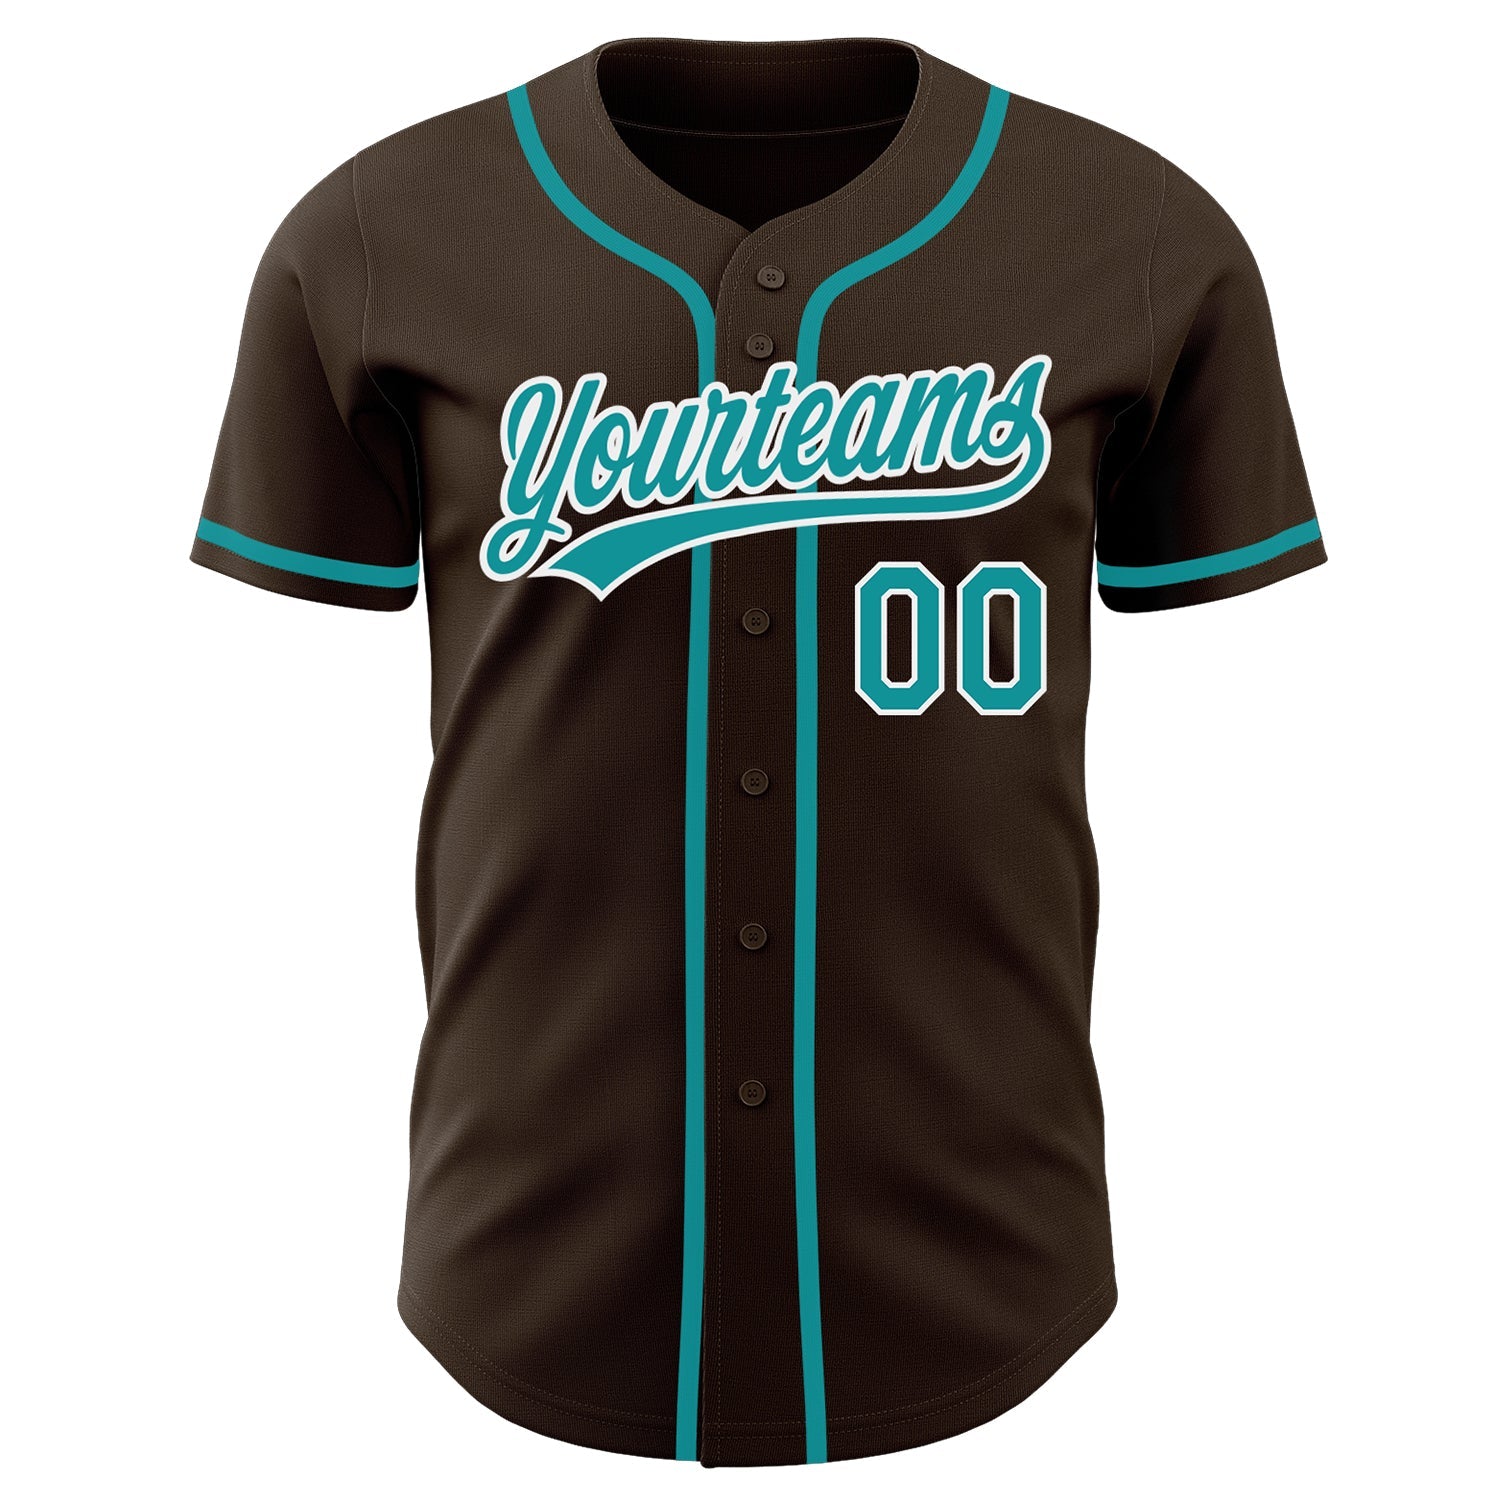 Custom Brown Teal-White Authentic Baseball Jersey